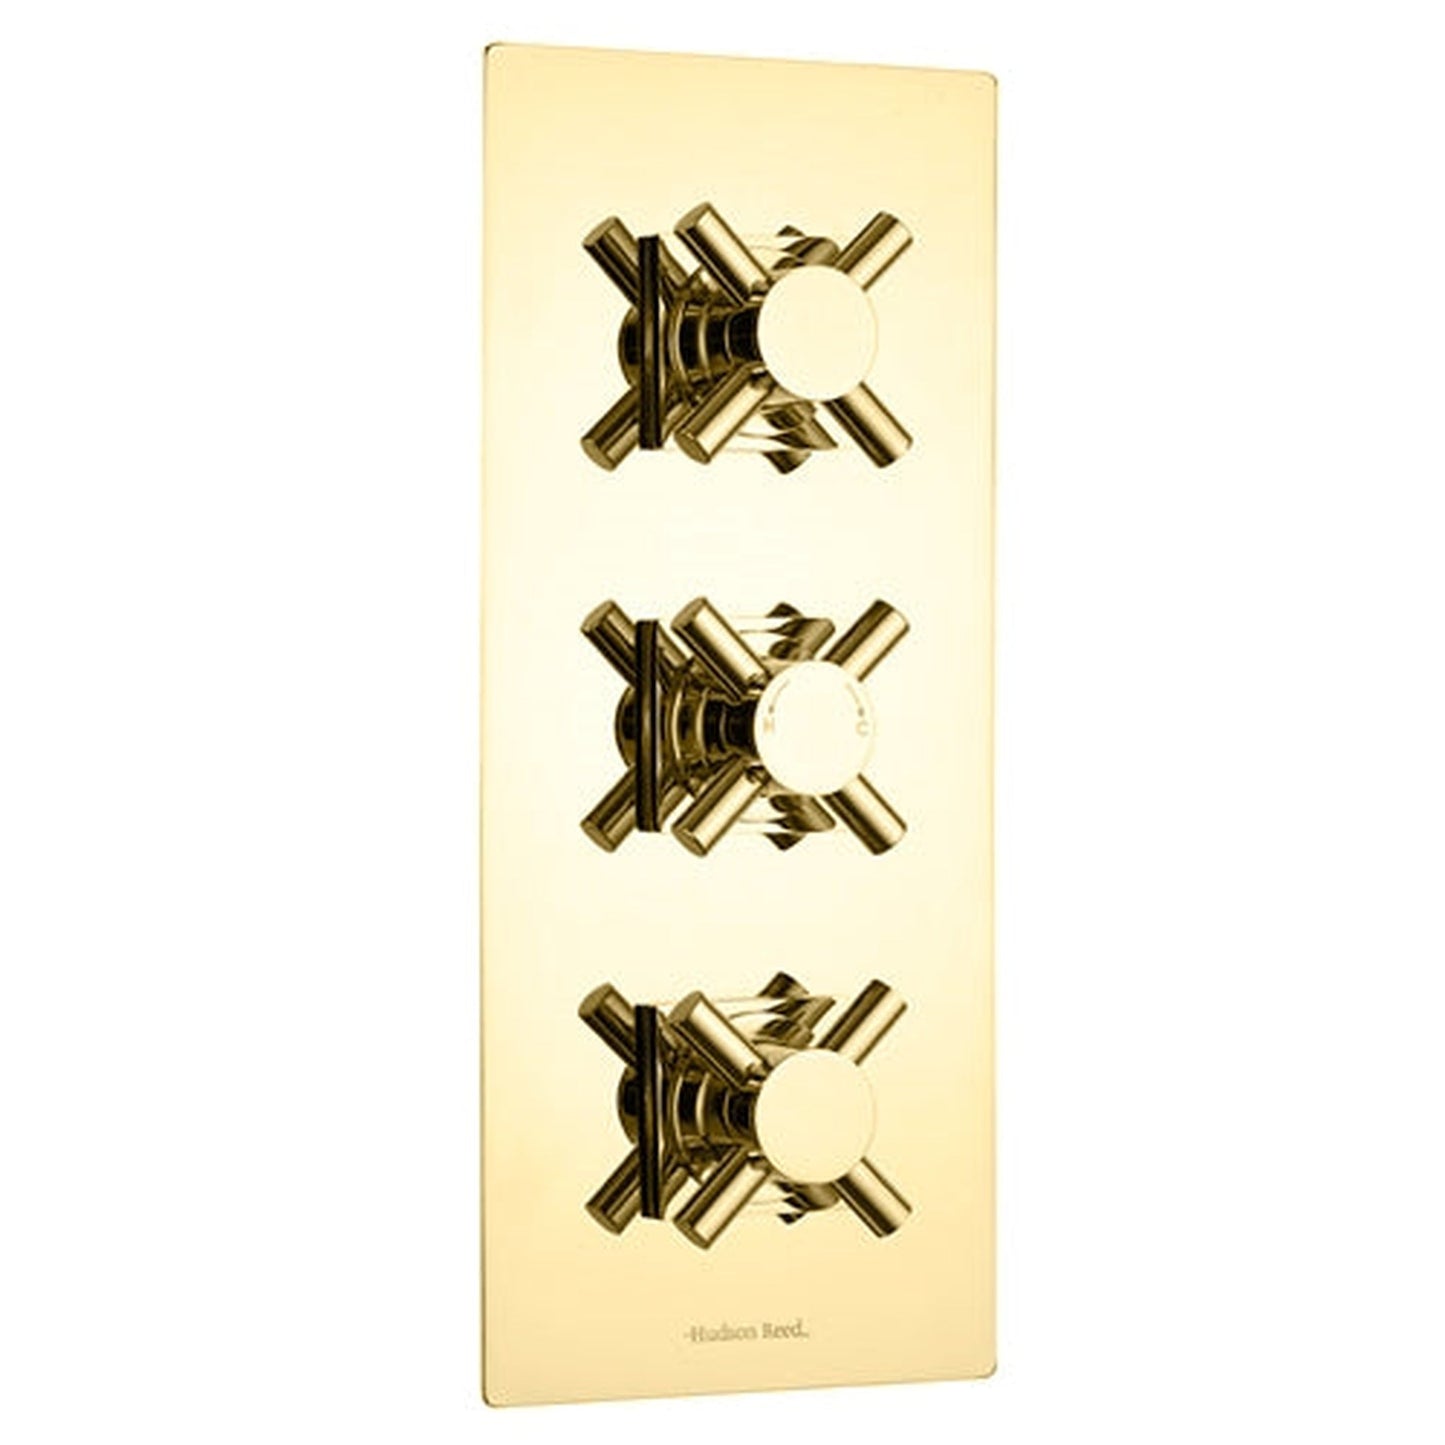 Fontana Reno 8" Gold Square Ceiling Mounted Rainfall Shower System With 6-Body Massage Jets and Hand Shower